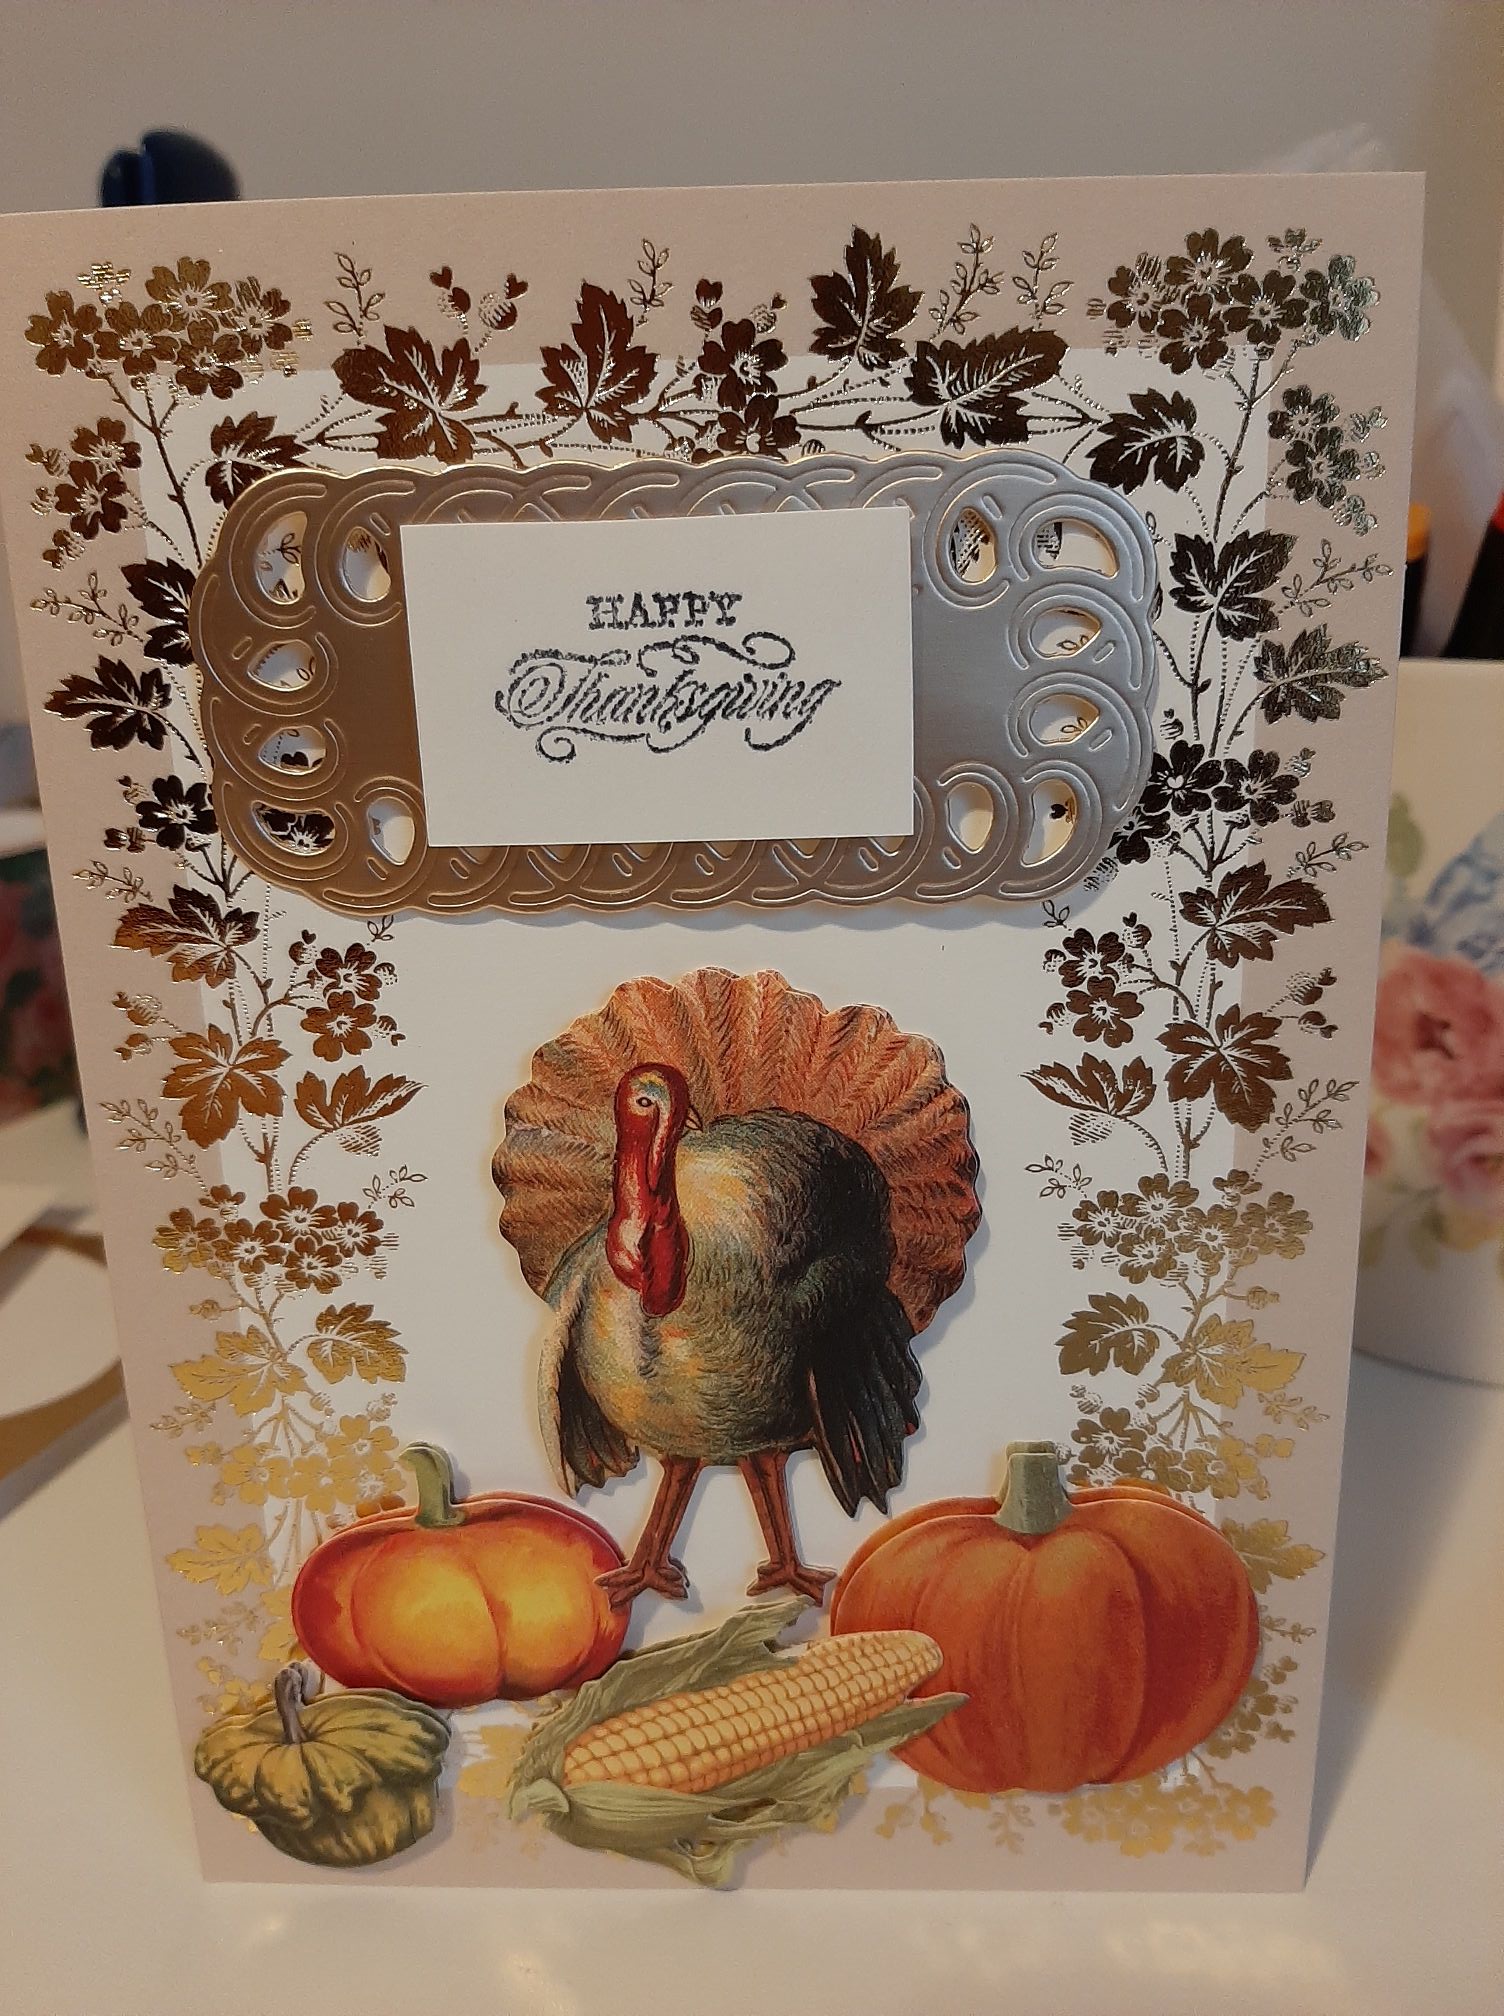 A thanksgiving card with a turkey and pumpkins.